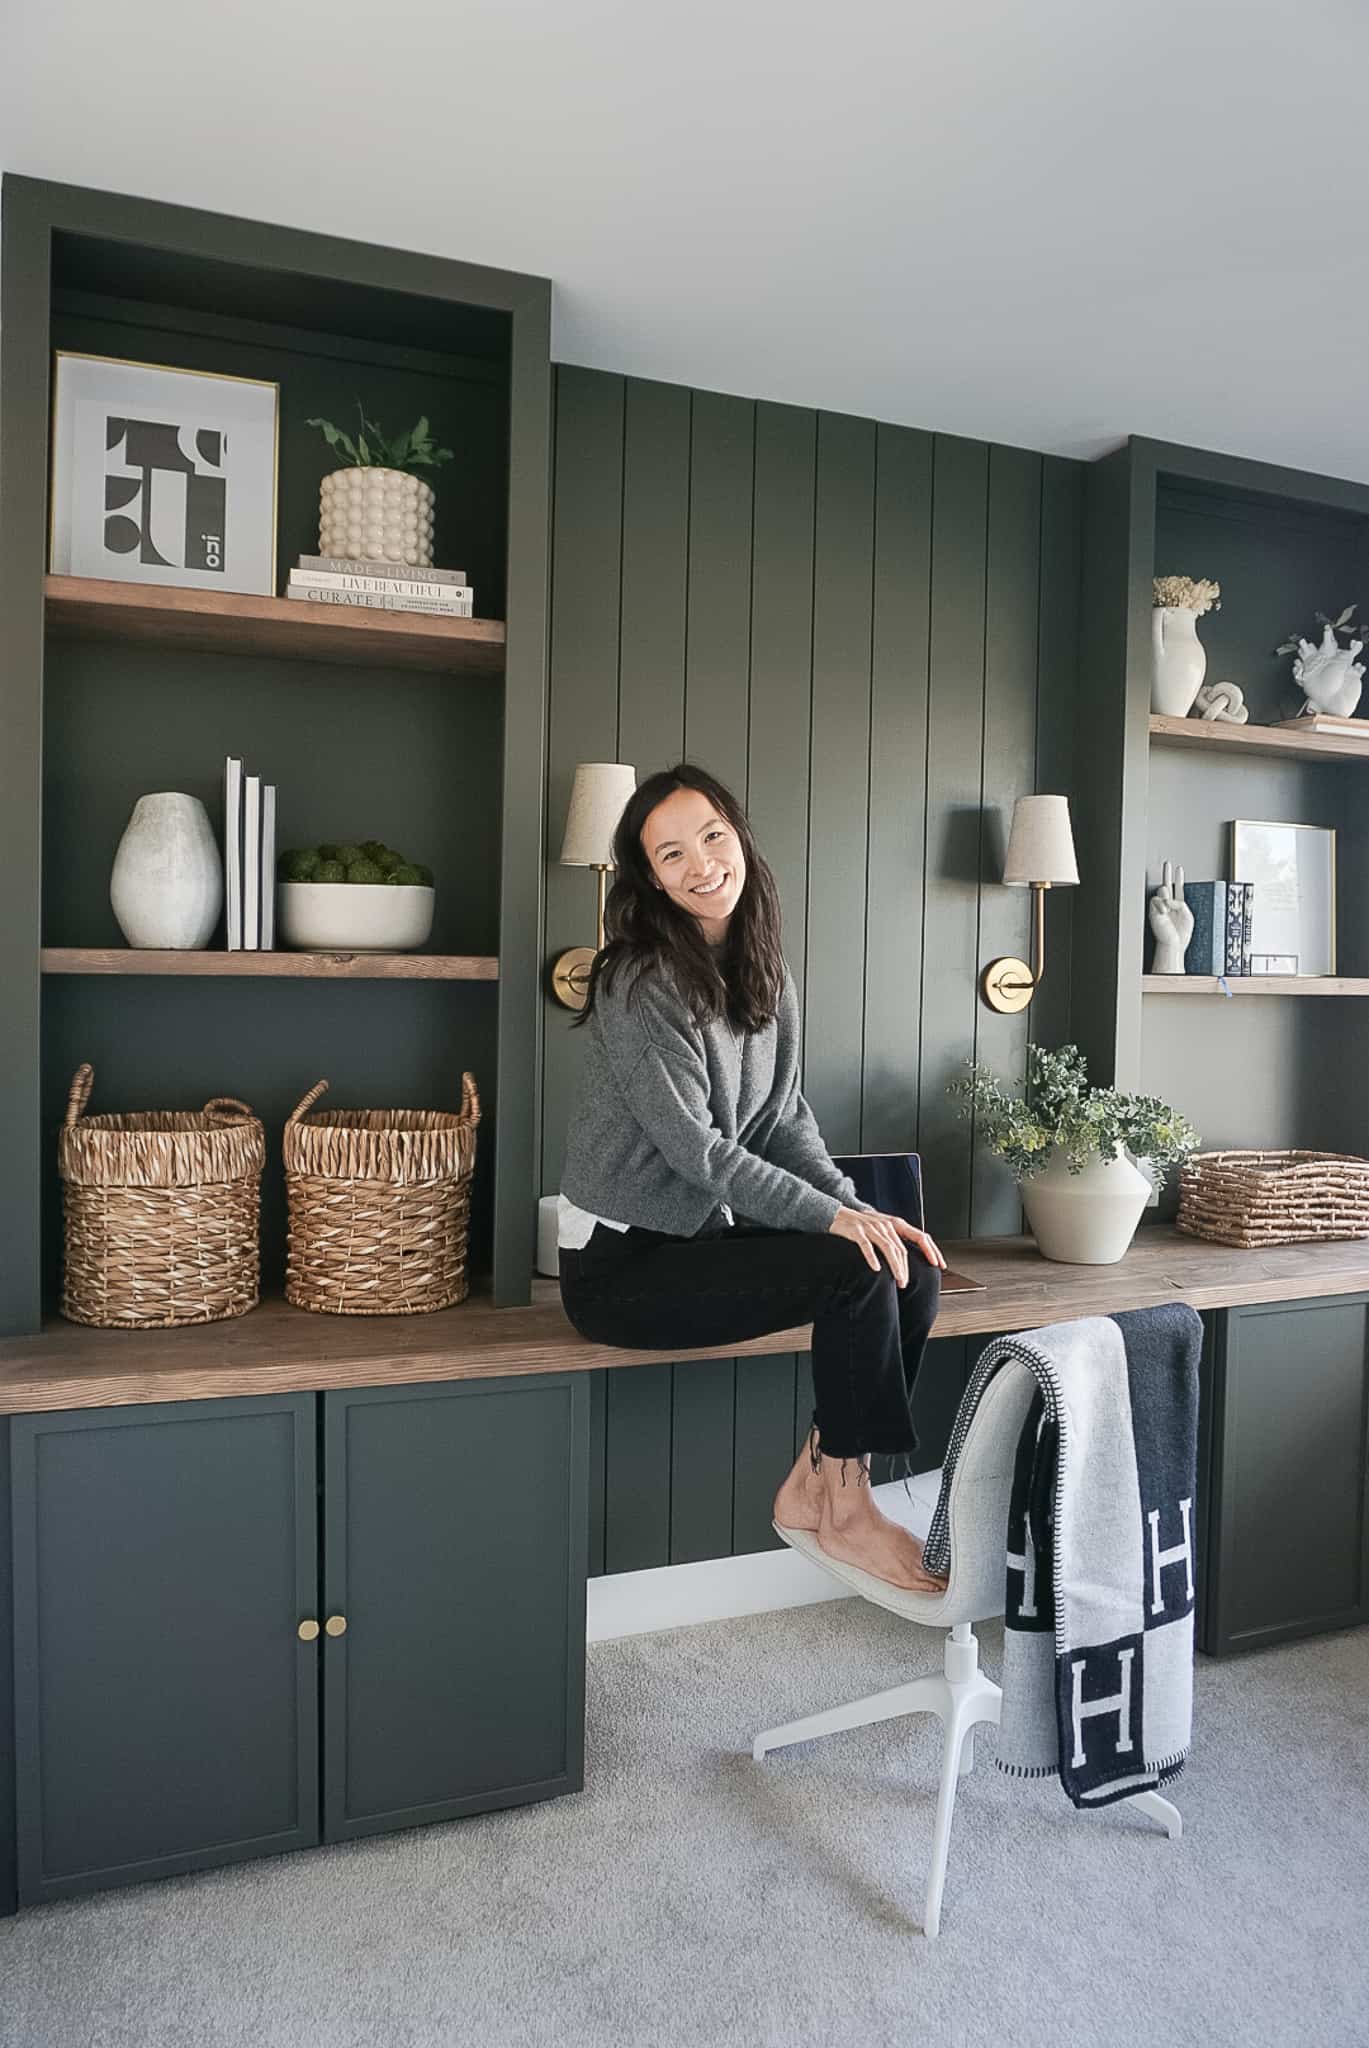 built in home office set up in a deep mossy green with shiplap and lighting at the back, bookshelves on either side and neutral decor throughout. Signed Samantha is sitting on the desk.